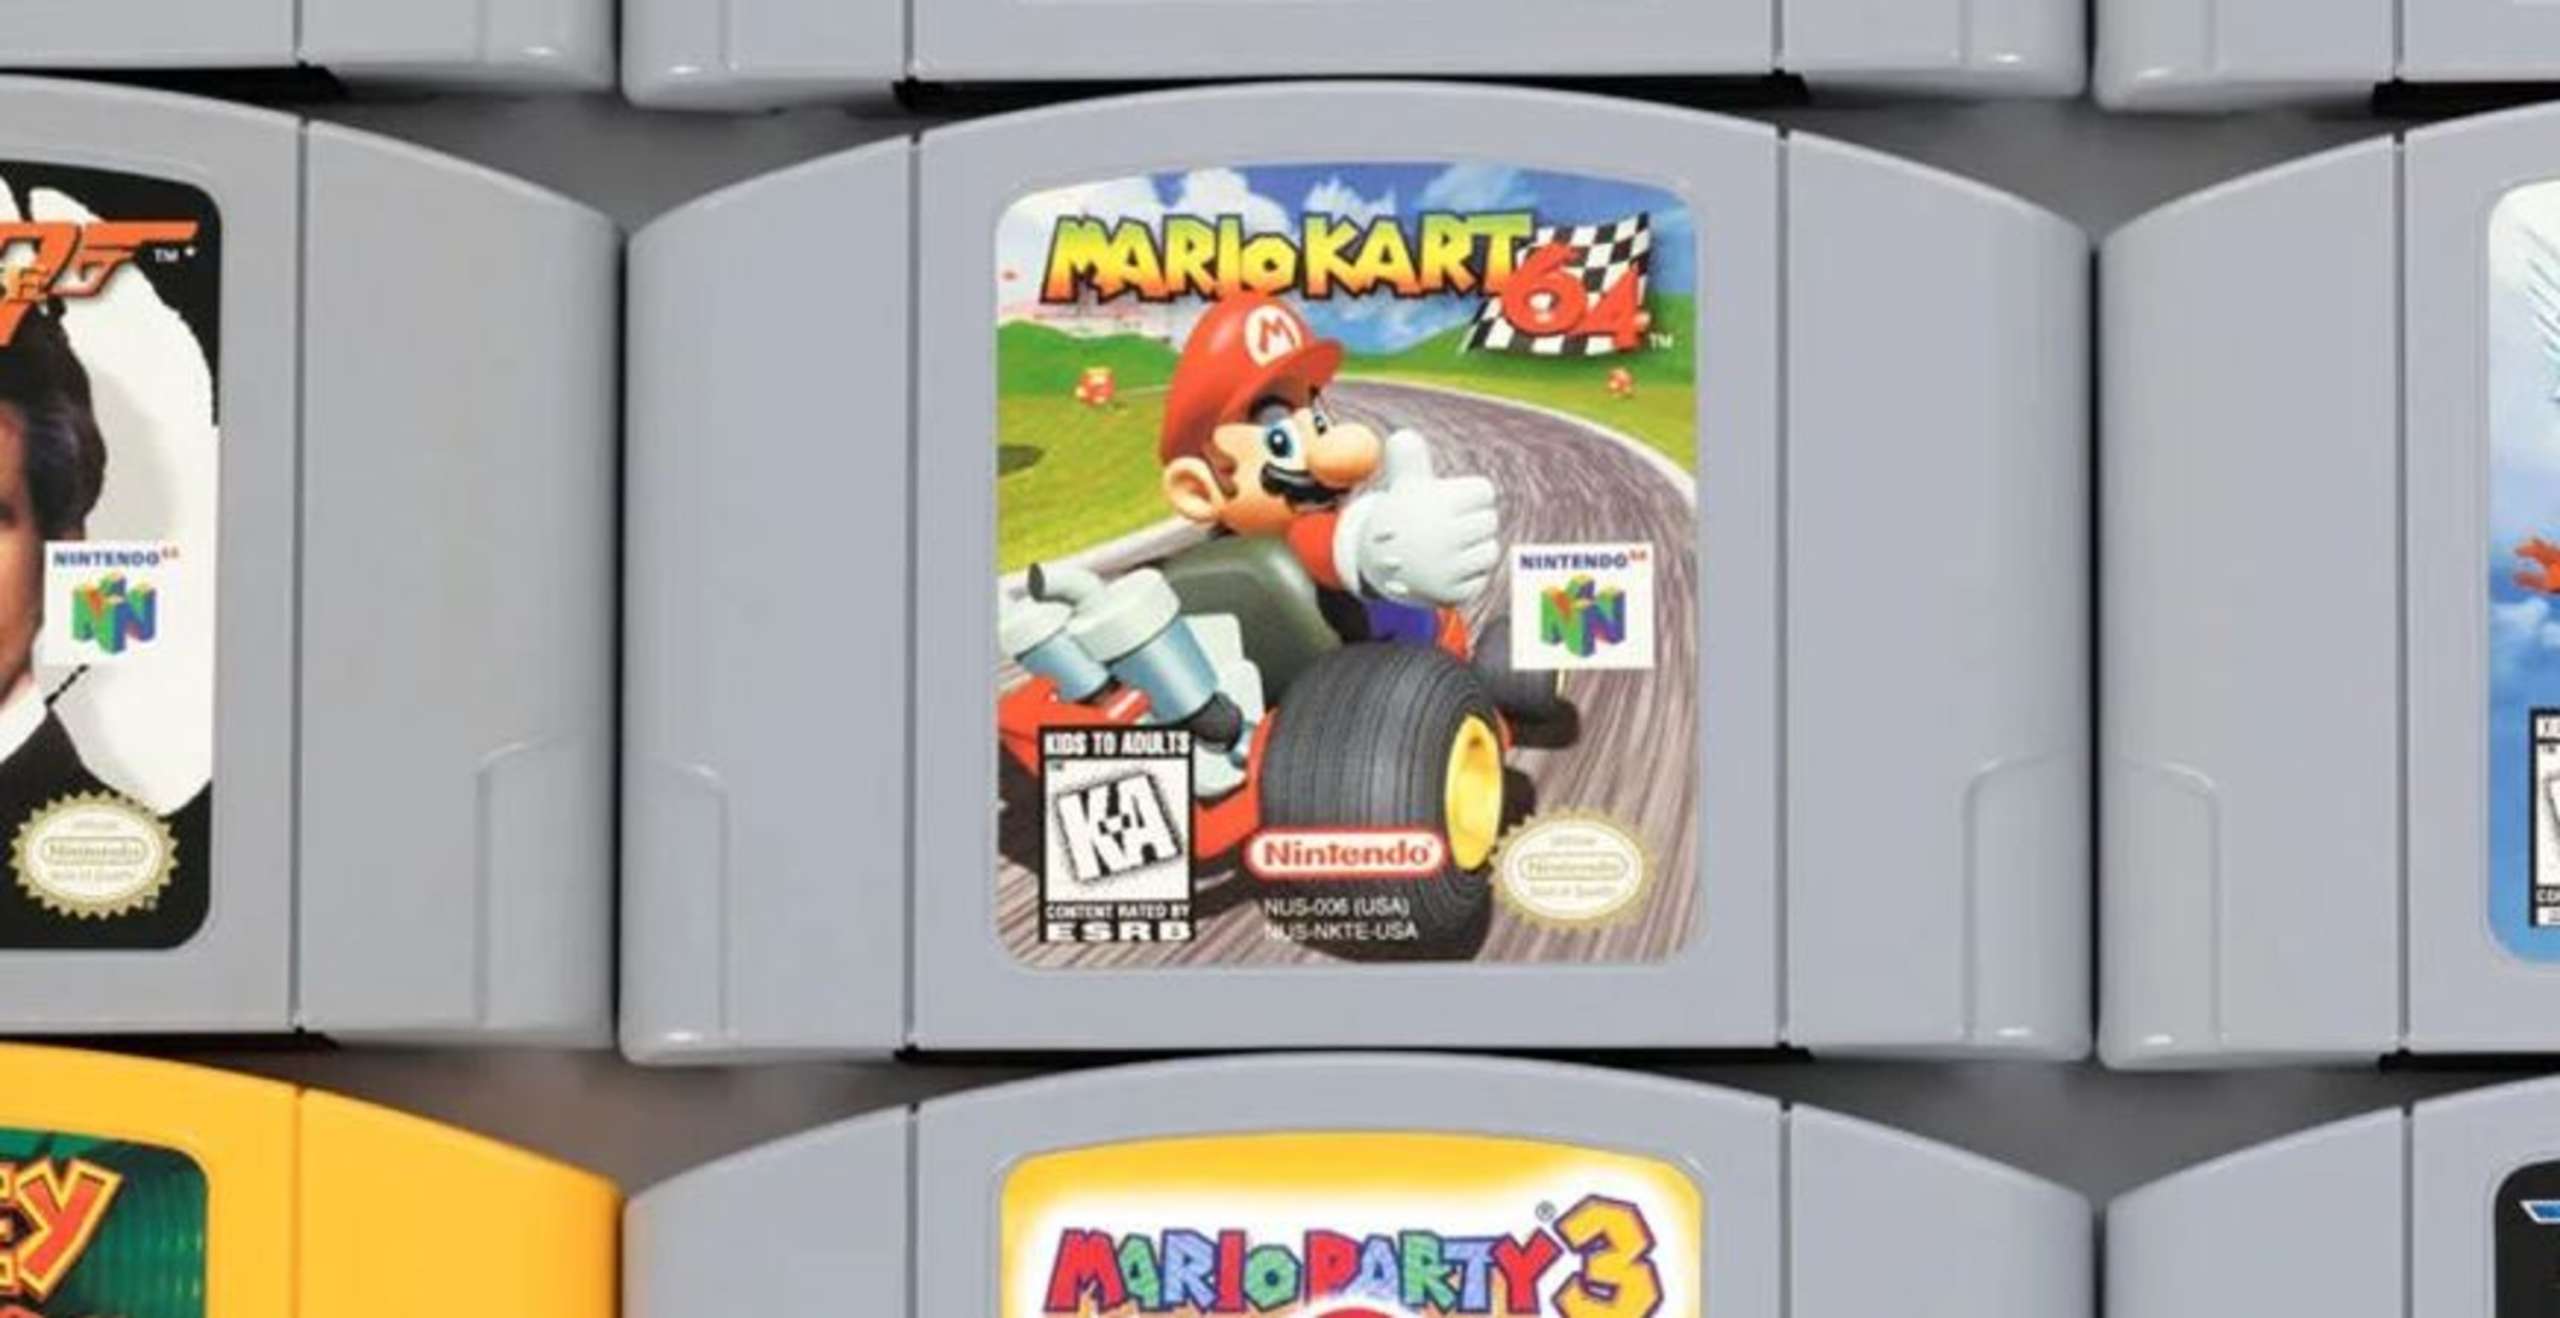 A Devoted Nintendo 64 Enthusiast Obtains In-Development Gameplay Footage From A Rare Promotional VHS Tape And Posts It Online For Everyone To See